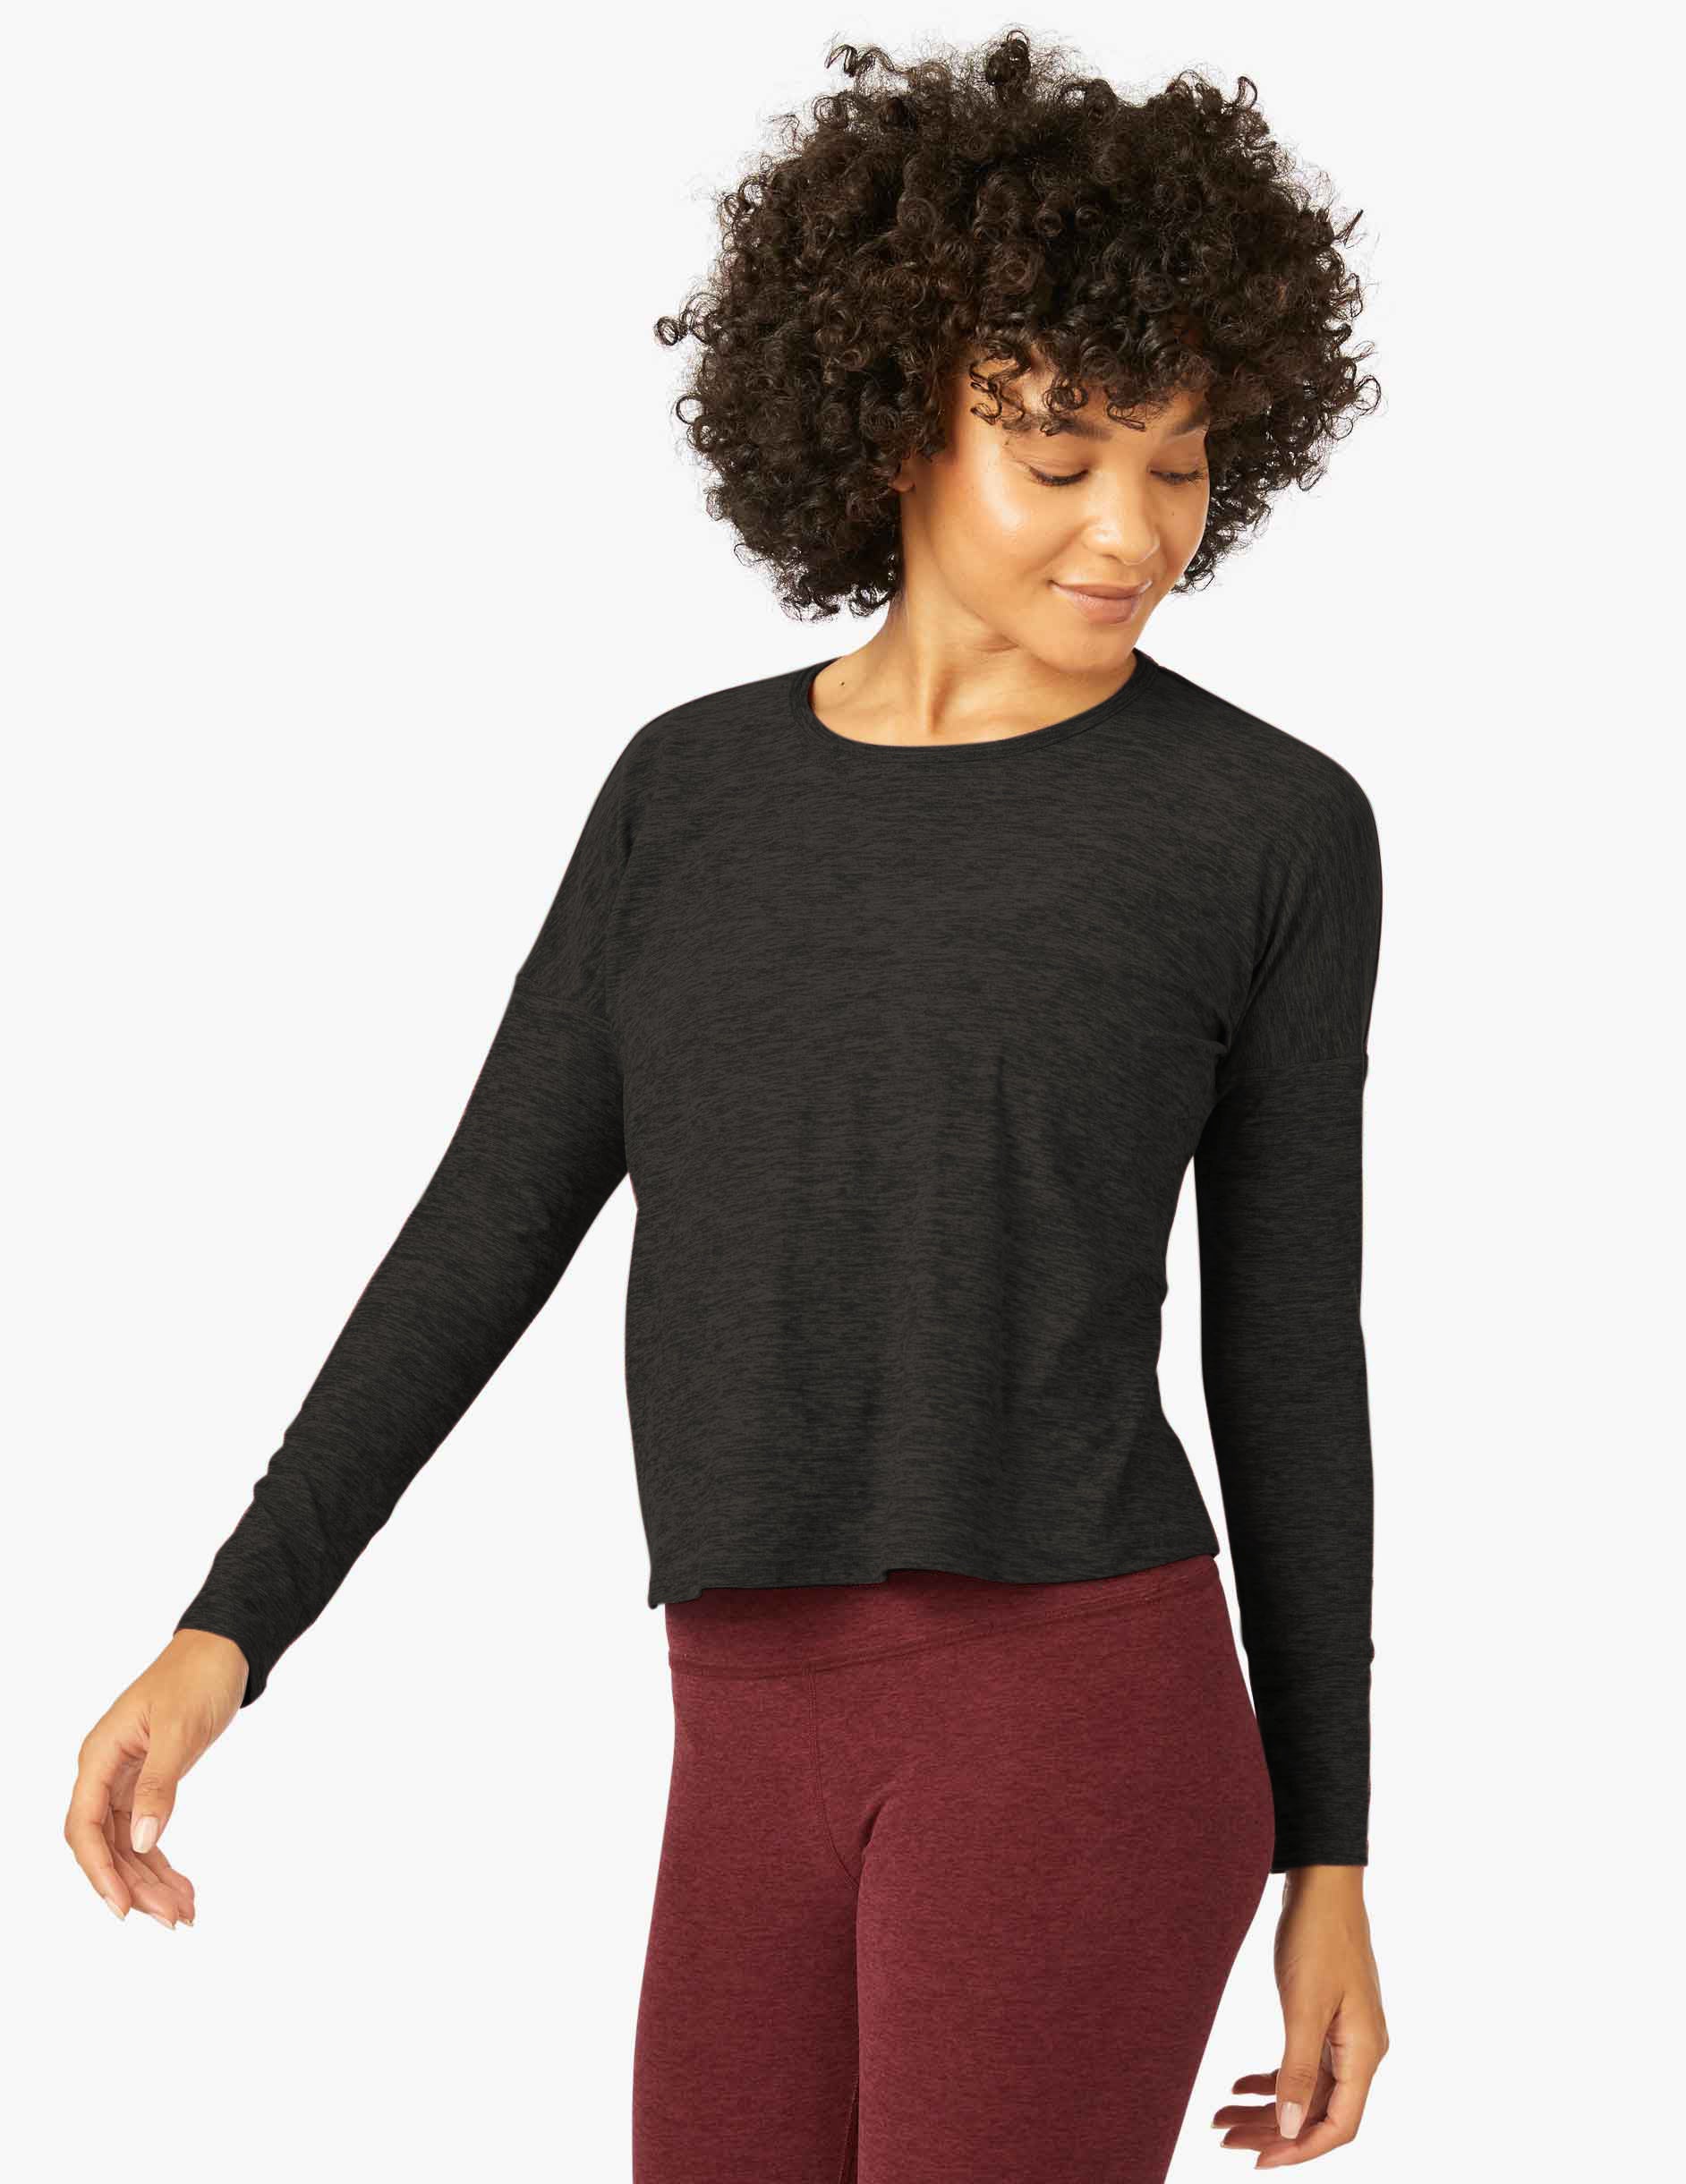 Featherweight Morning Light Pullover